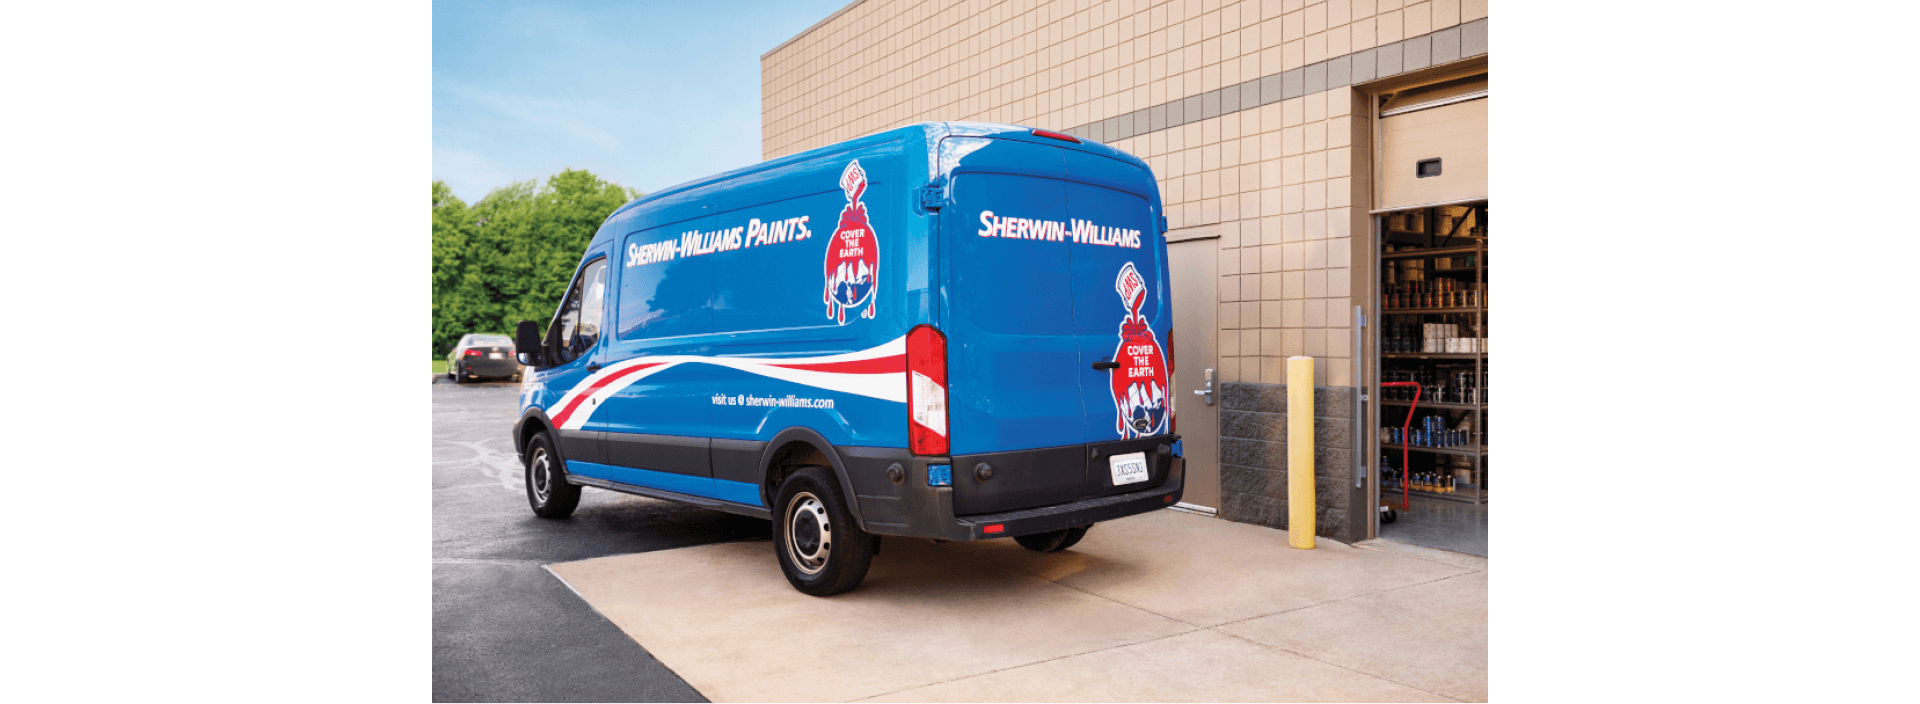 A Sherwin-Williams delivery van.